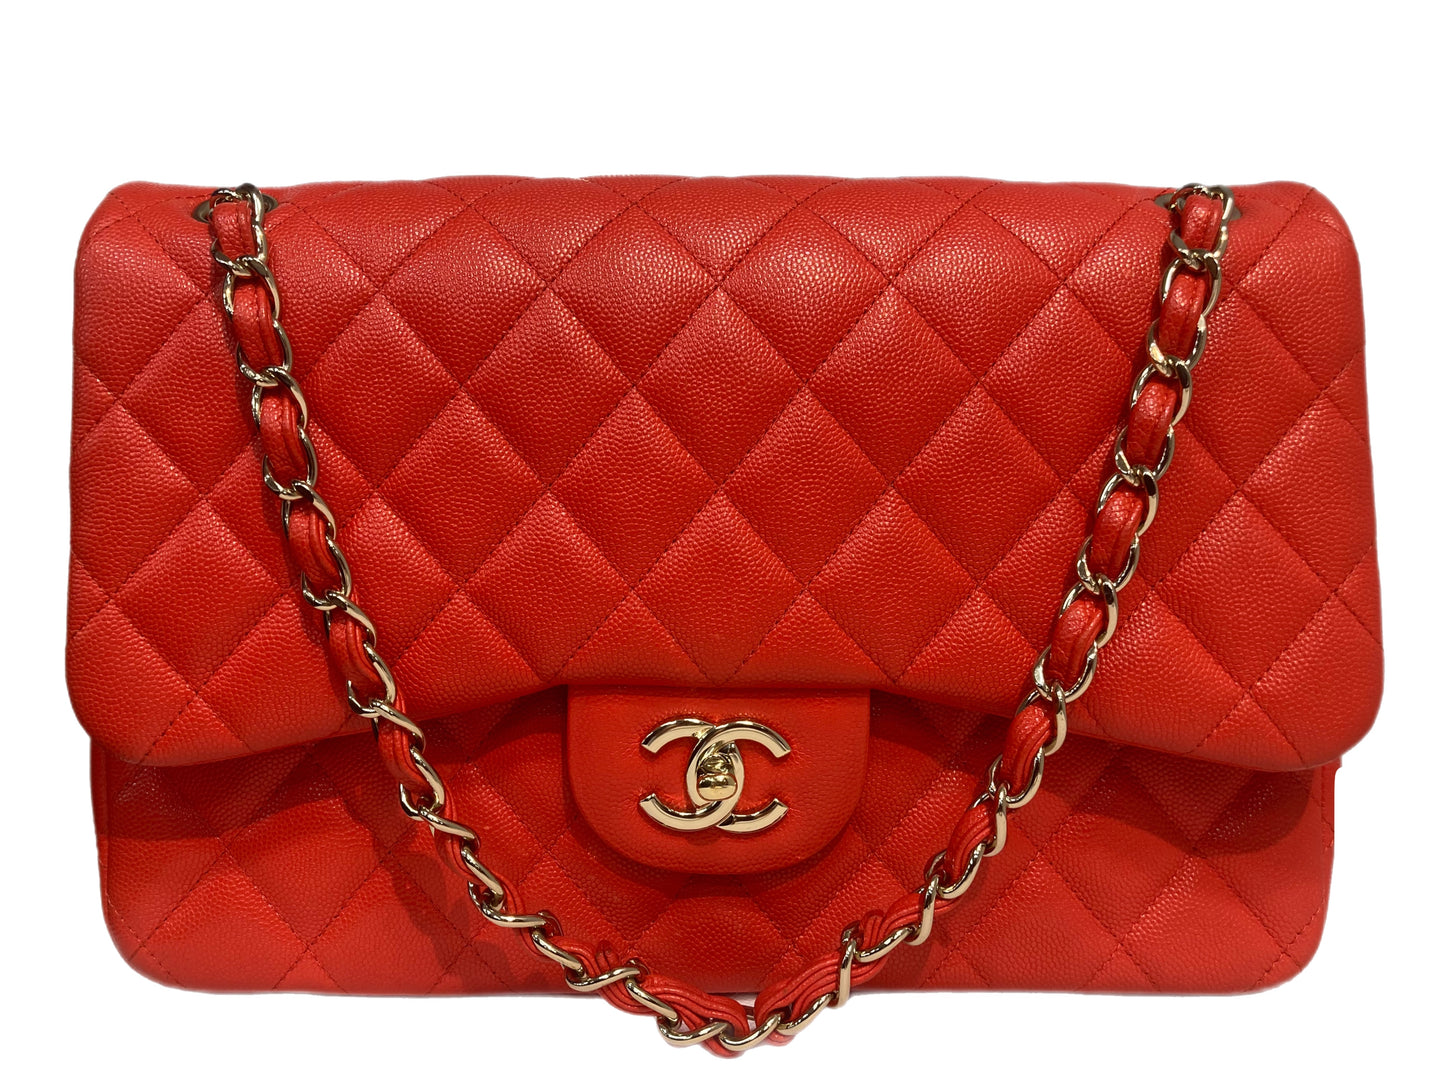 Chanel - authentic luxury pieces curated by Loveholic – Page 2 – loveholic